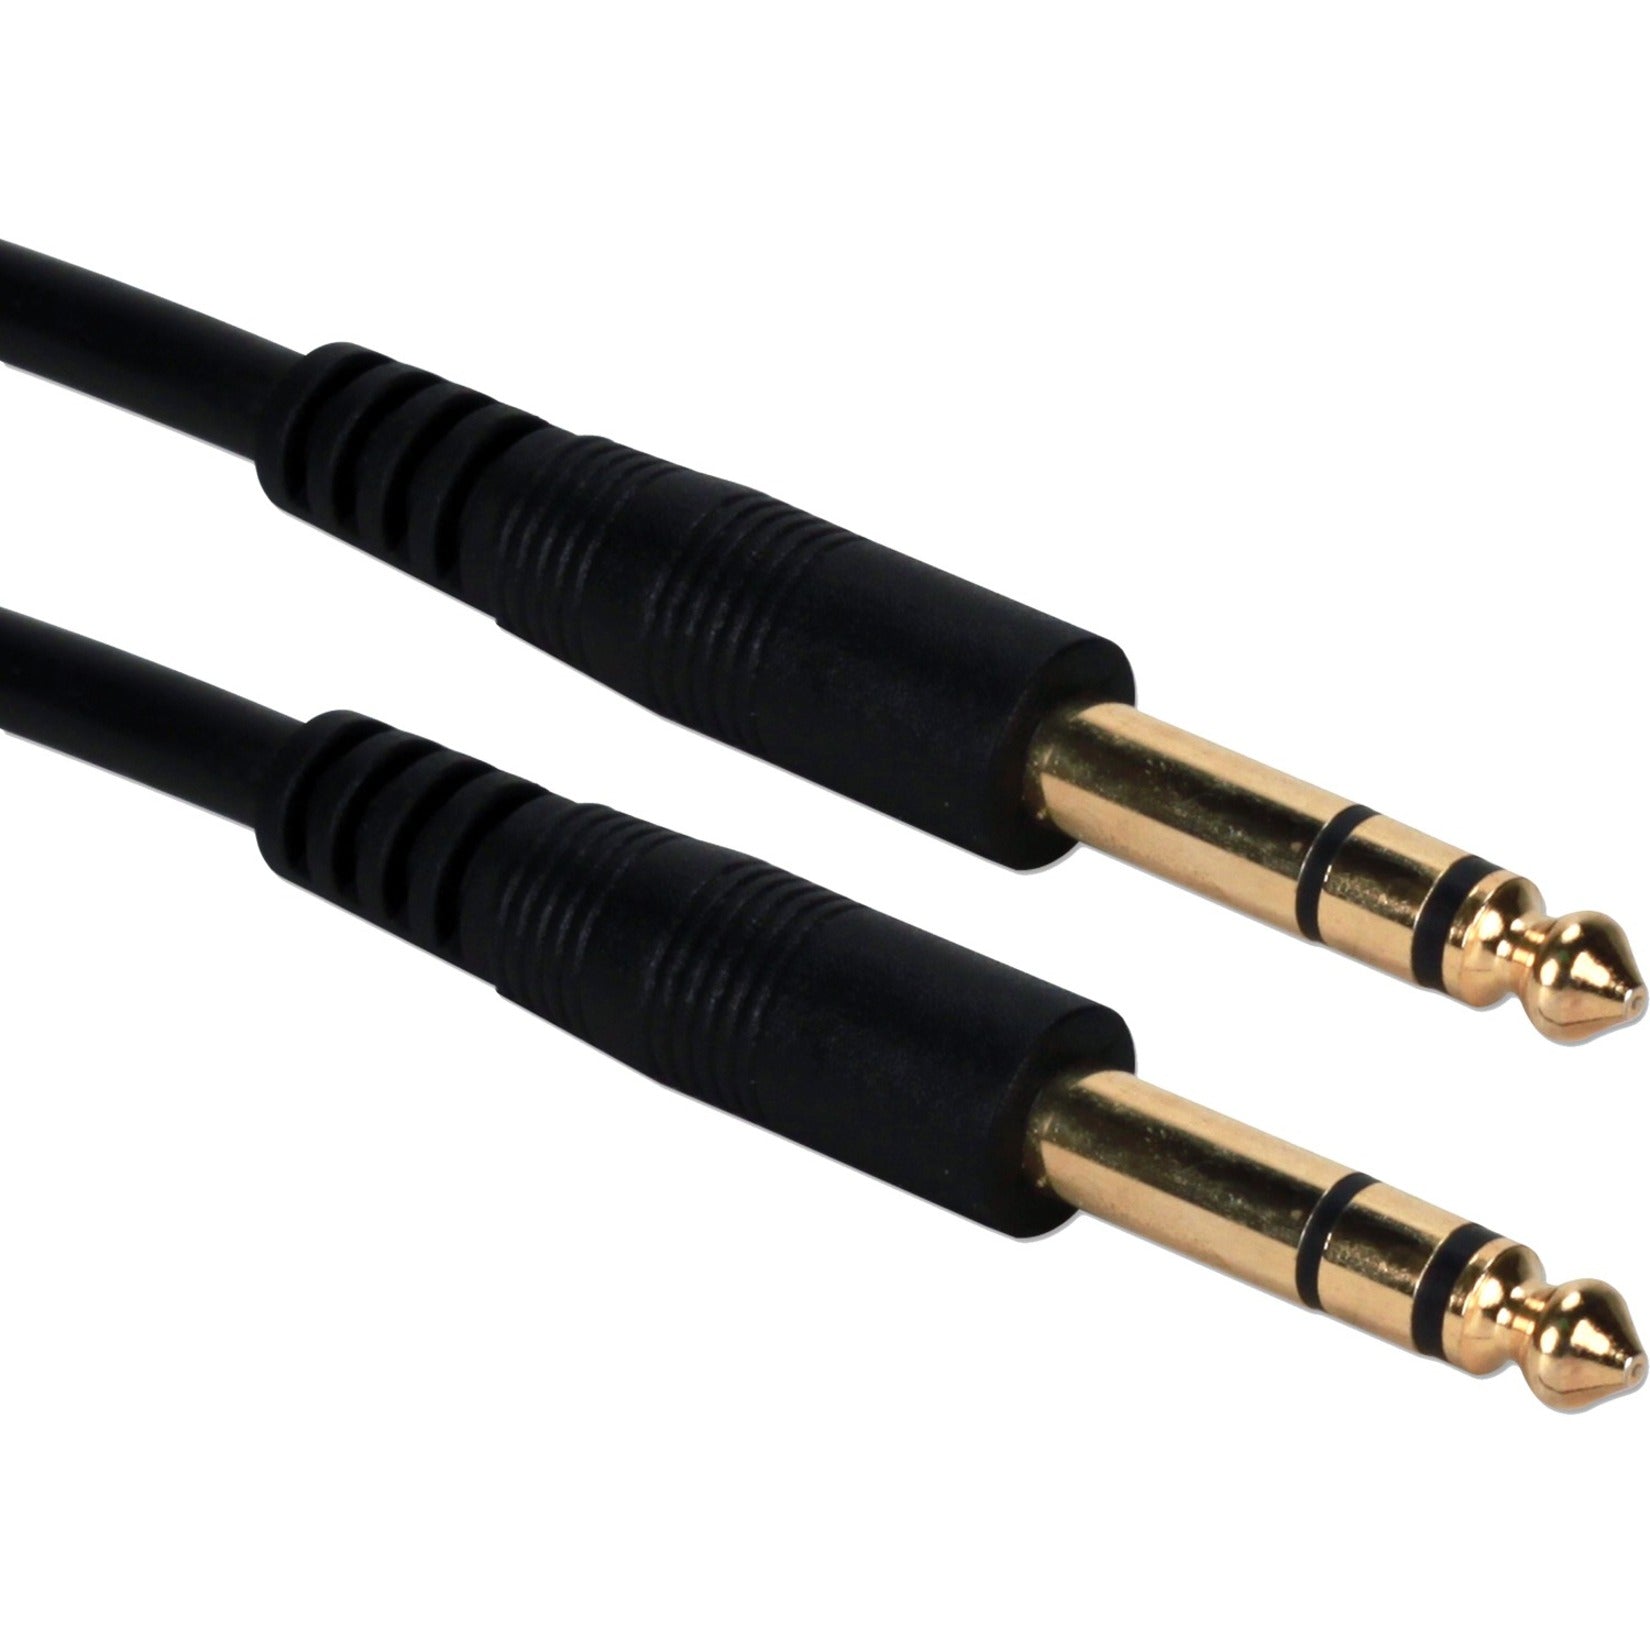 QVS TRS-06 6ft 1/4 Male to Male Audio Cable, Flexible and Strain Relief